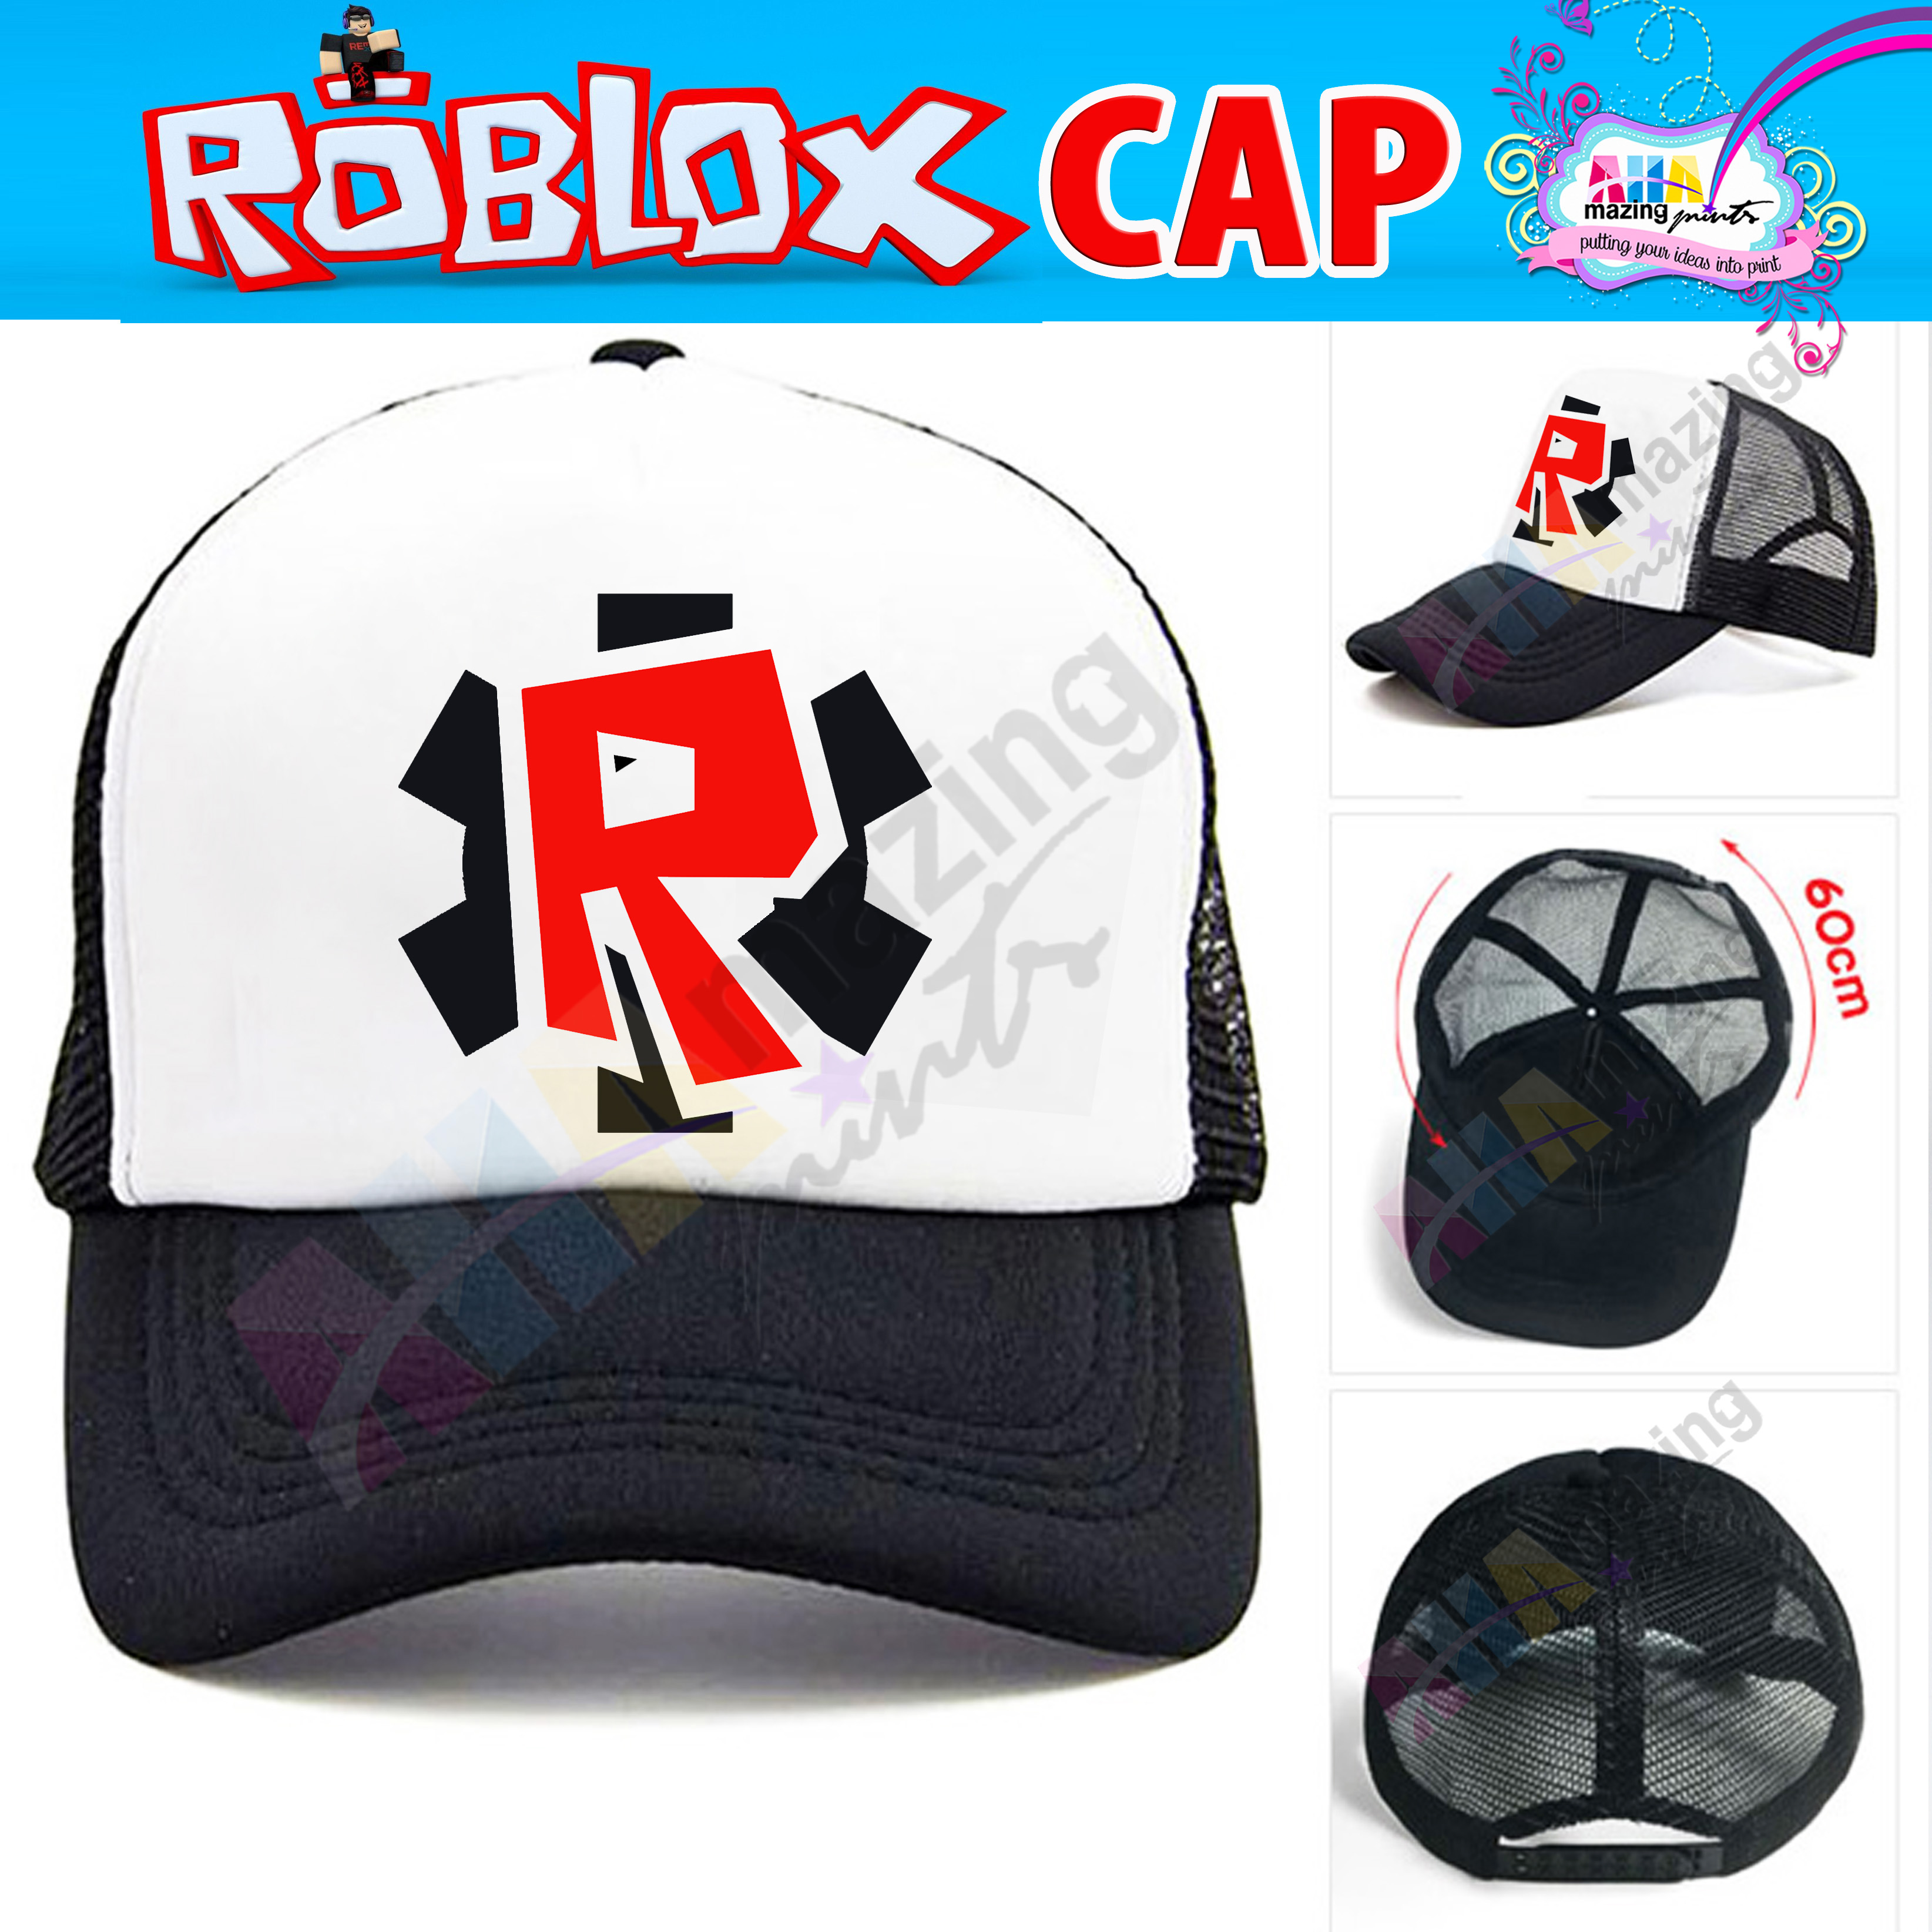 Roblox Cap Gear Black One Size Only Free Size Only Pls Read Description Fashion Boys Girls Unisex Statement Casual Custom Children Wear Cute Trending Viral Ootd High Quality Birthday Christmas Ninang Ninong - roblox free cute outfits for girls